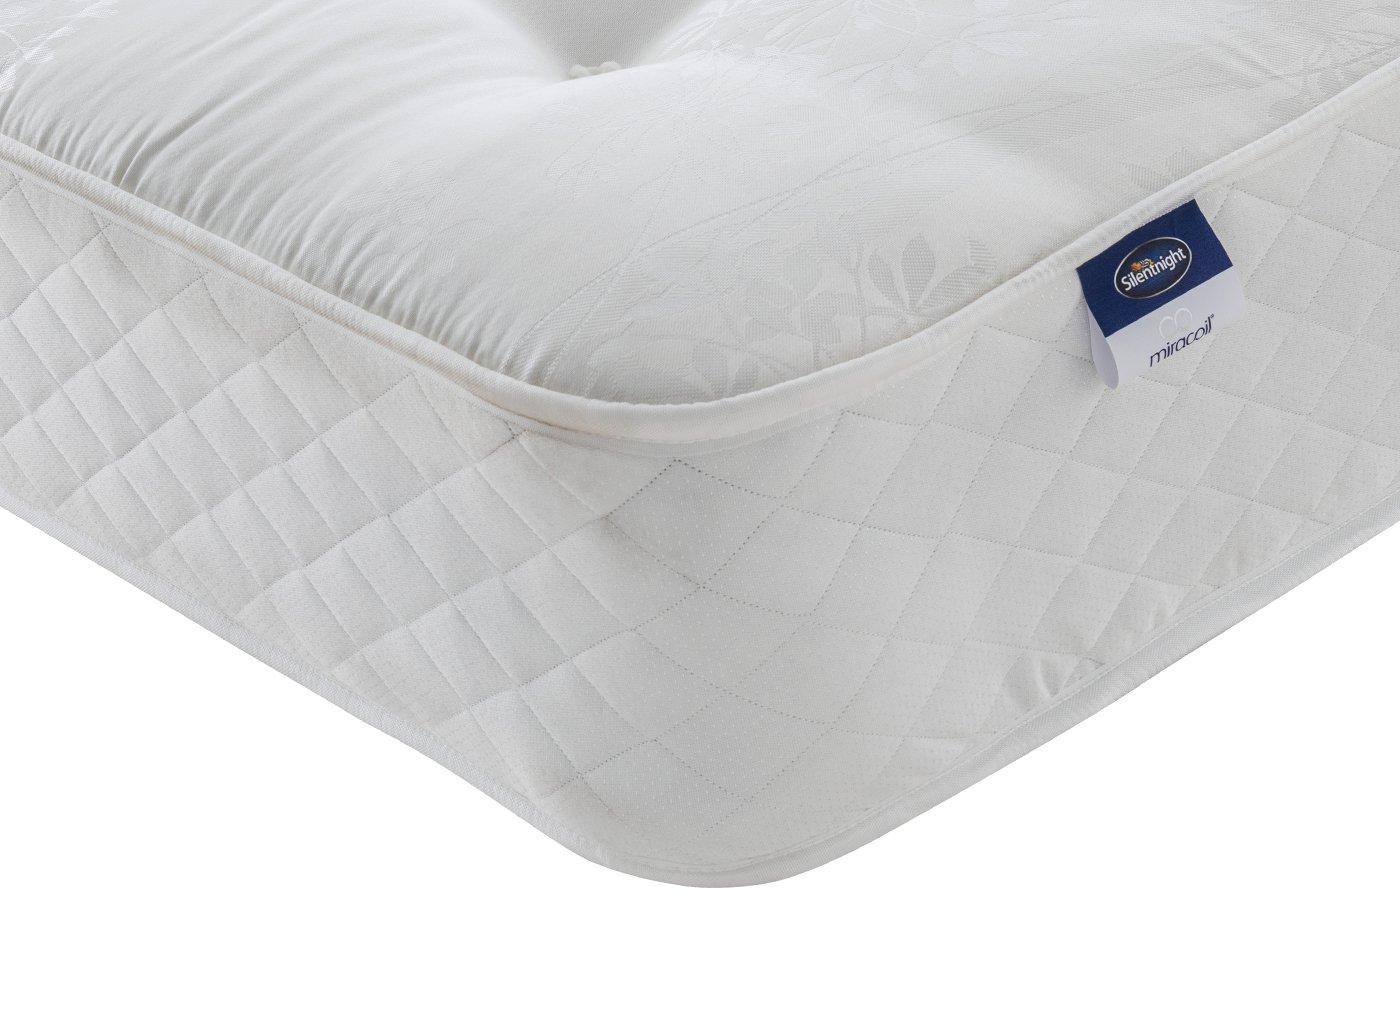 silent night miracoil ortho mattress king size